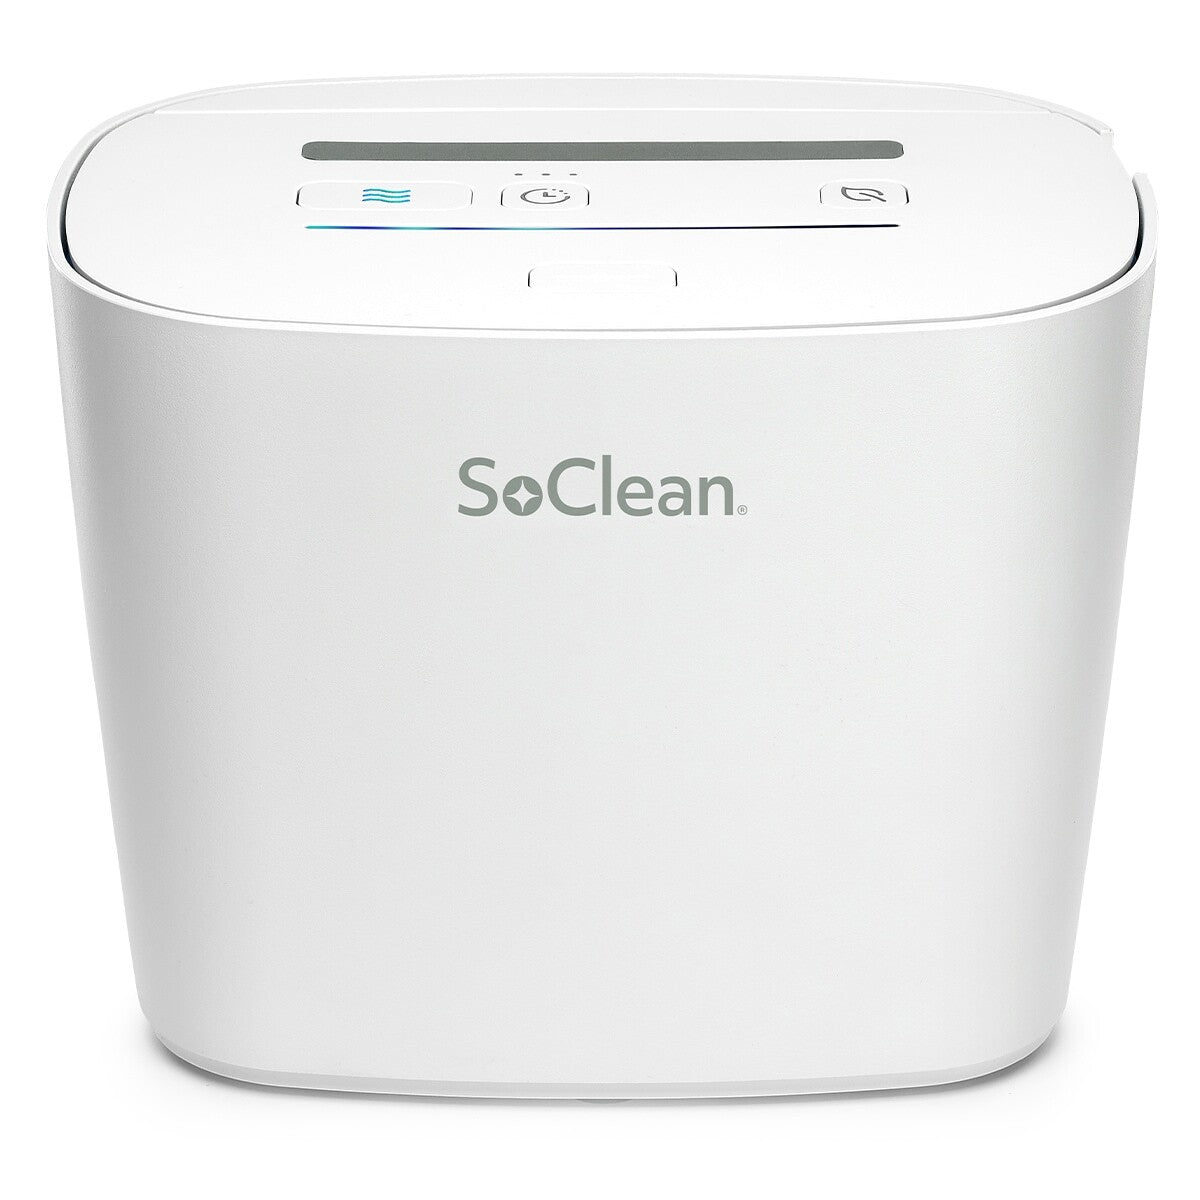 SoClean 3 CPAP/BiPAP Cleaner & Sanitizer (Includes Tubing Adapter)